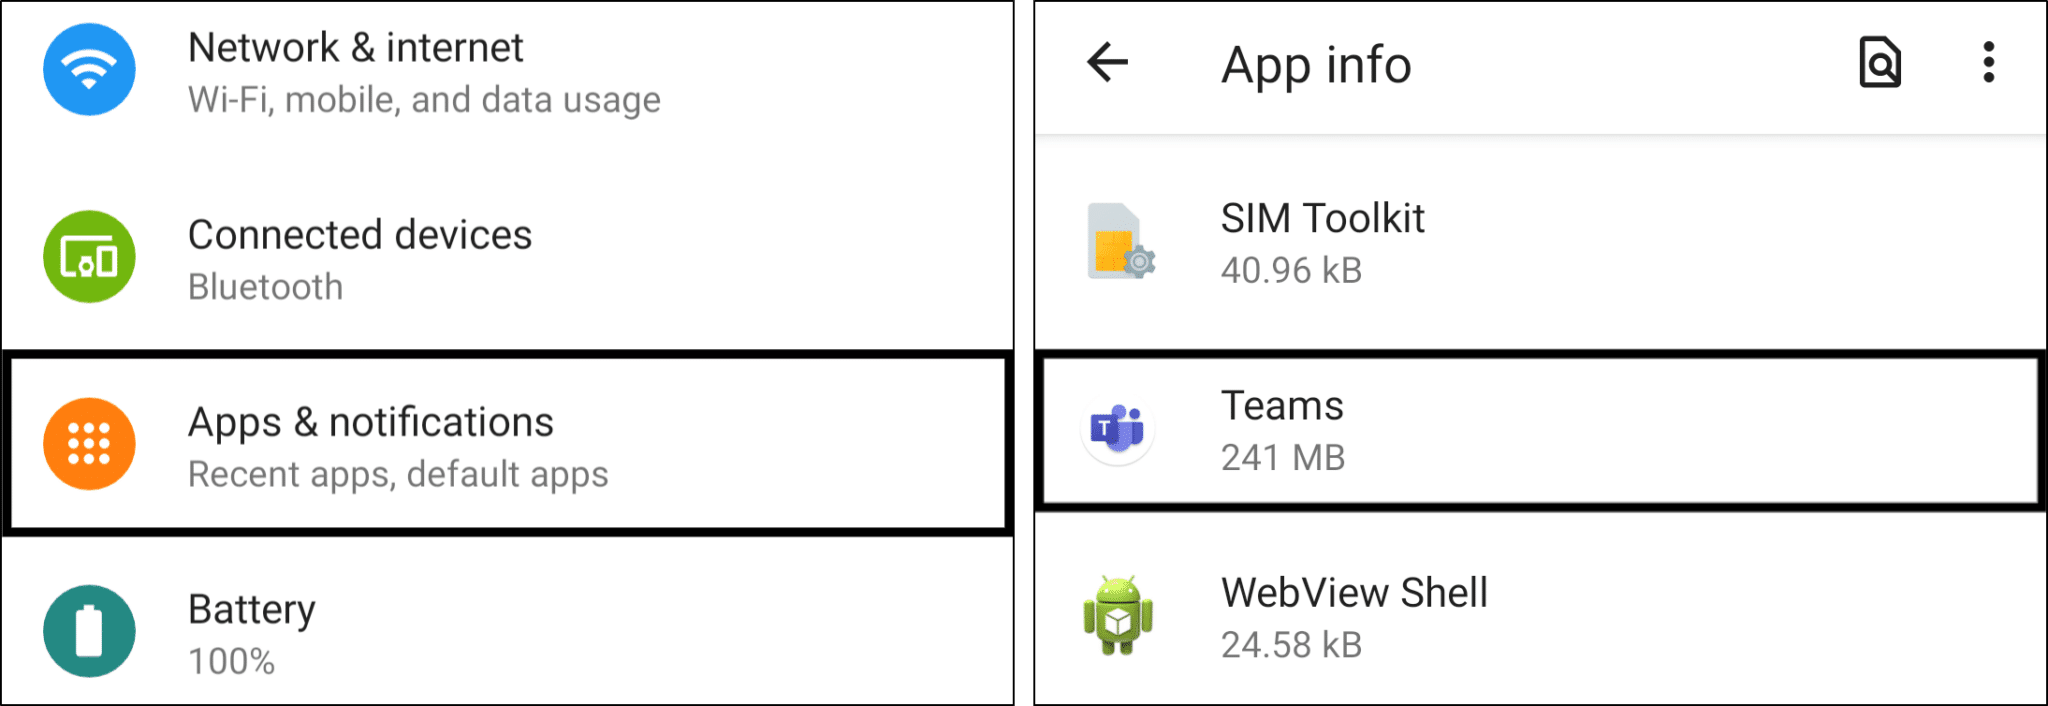 access Microsoft Teams app settings in system settings on Android to clear cache and to fix Teams contacts and calendar not showing